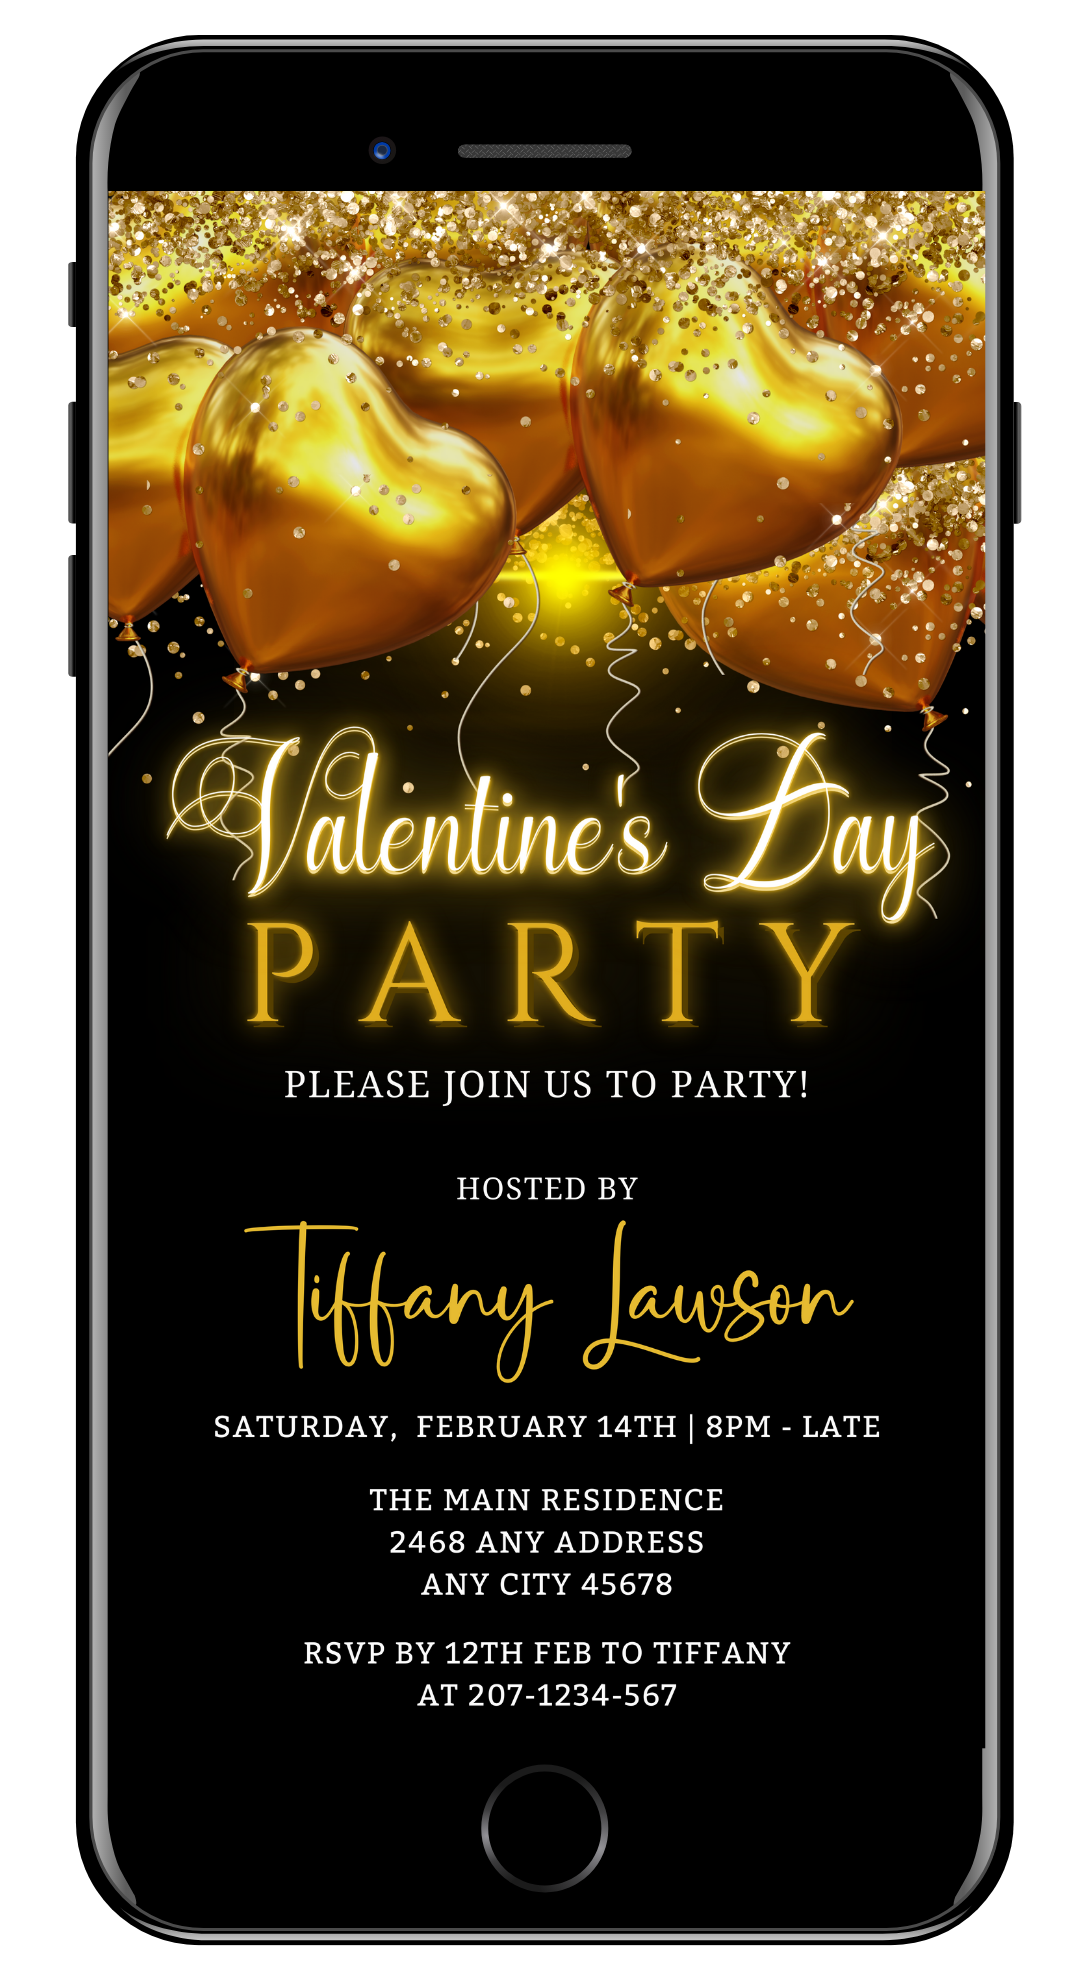 Neon Golden Heart Balloons | Valentines Party Evite with editable text, gold balloons, and glitter hearts for a customizable digital invitation via Canva.